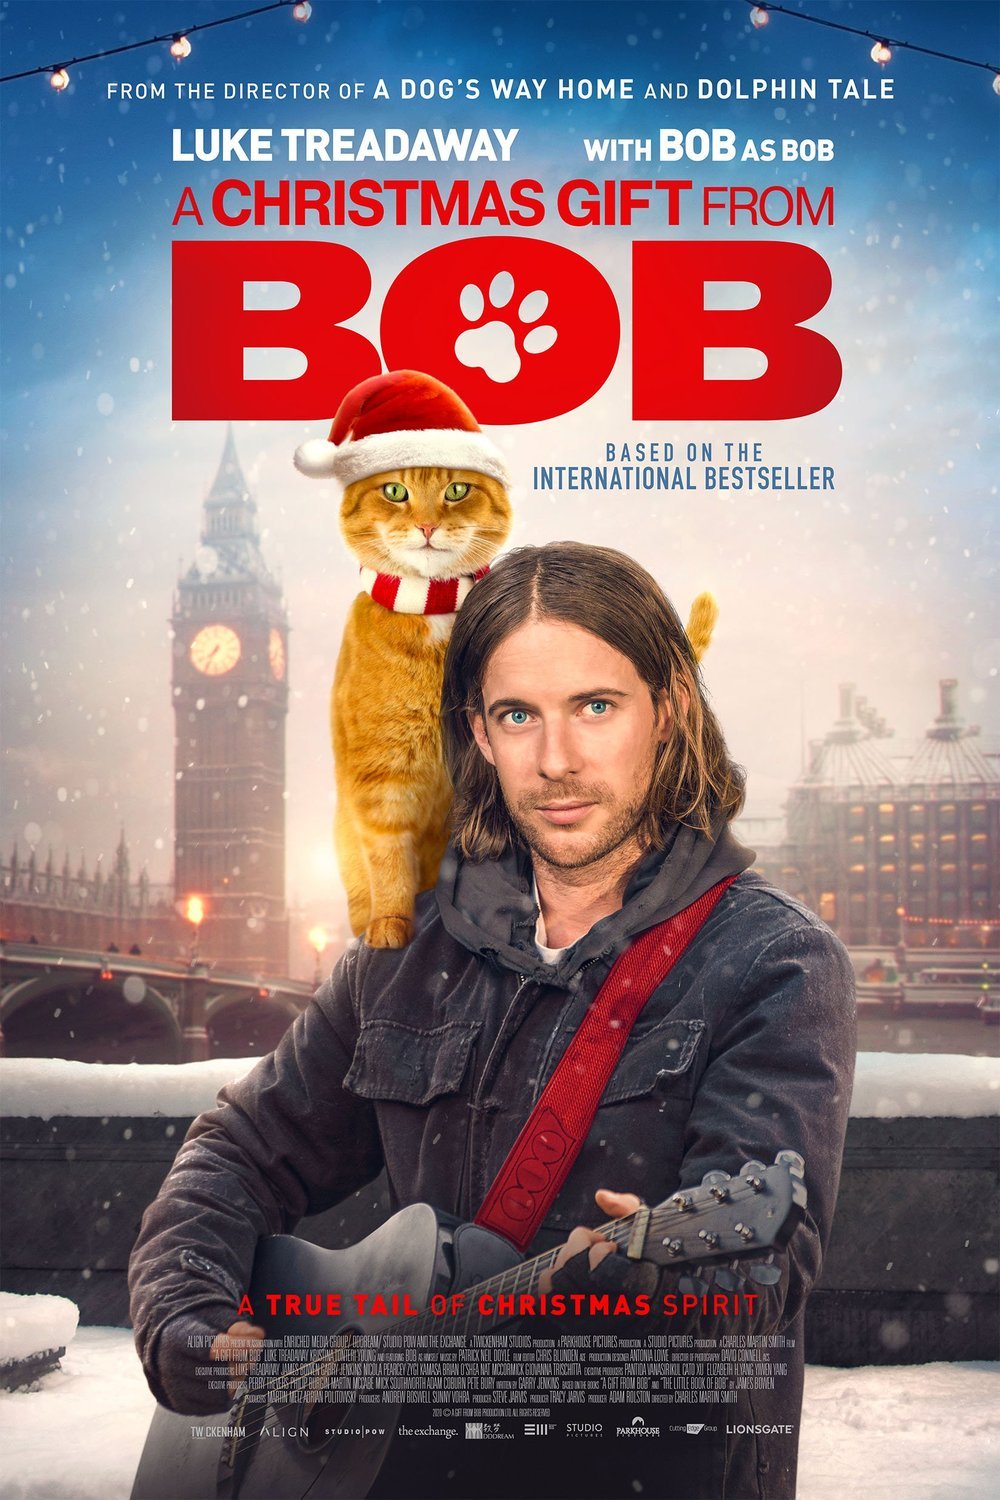 Poster of the movie A Christmas Gift from Bob